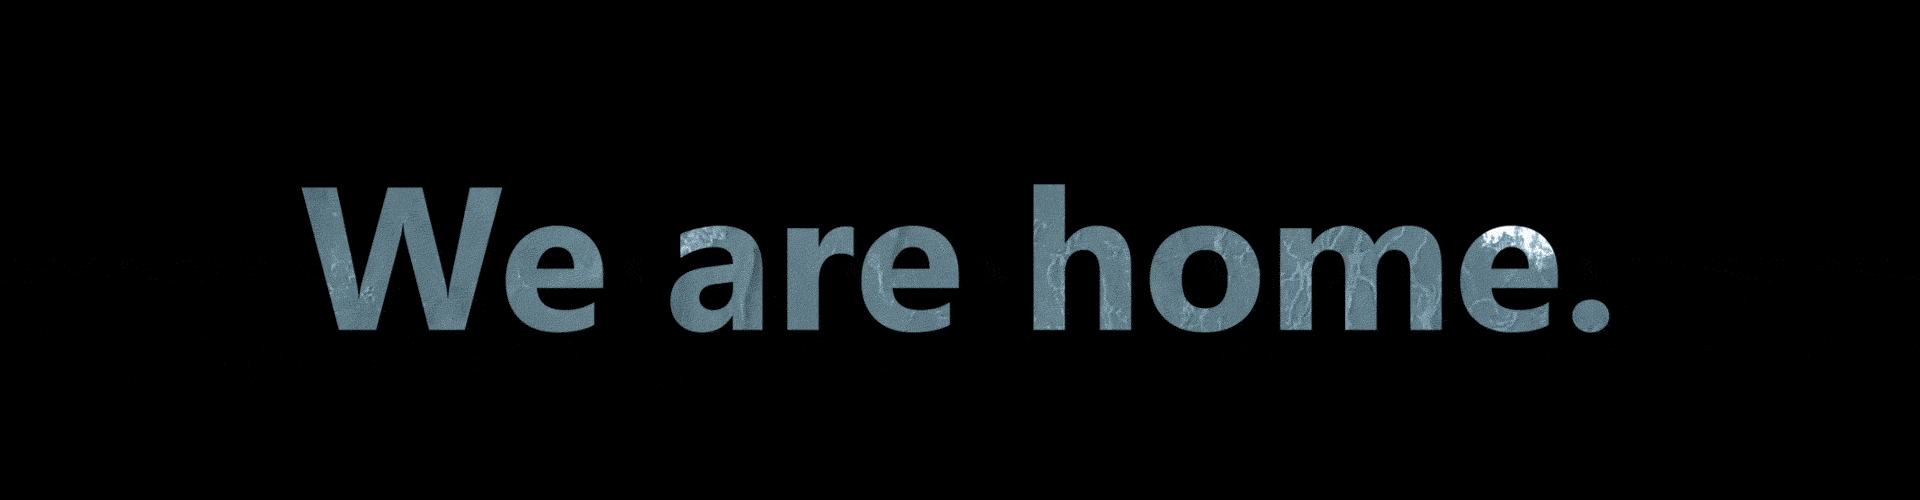 A black image with the words "We are home."